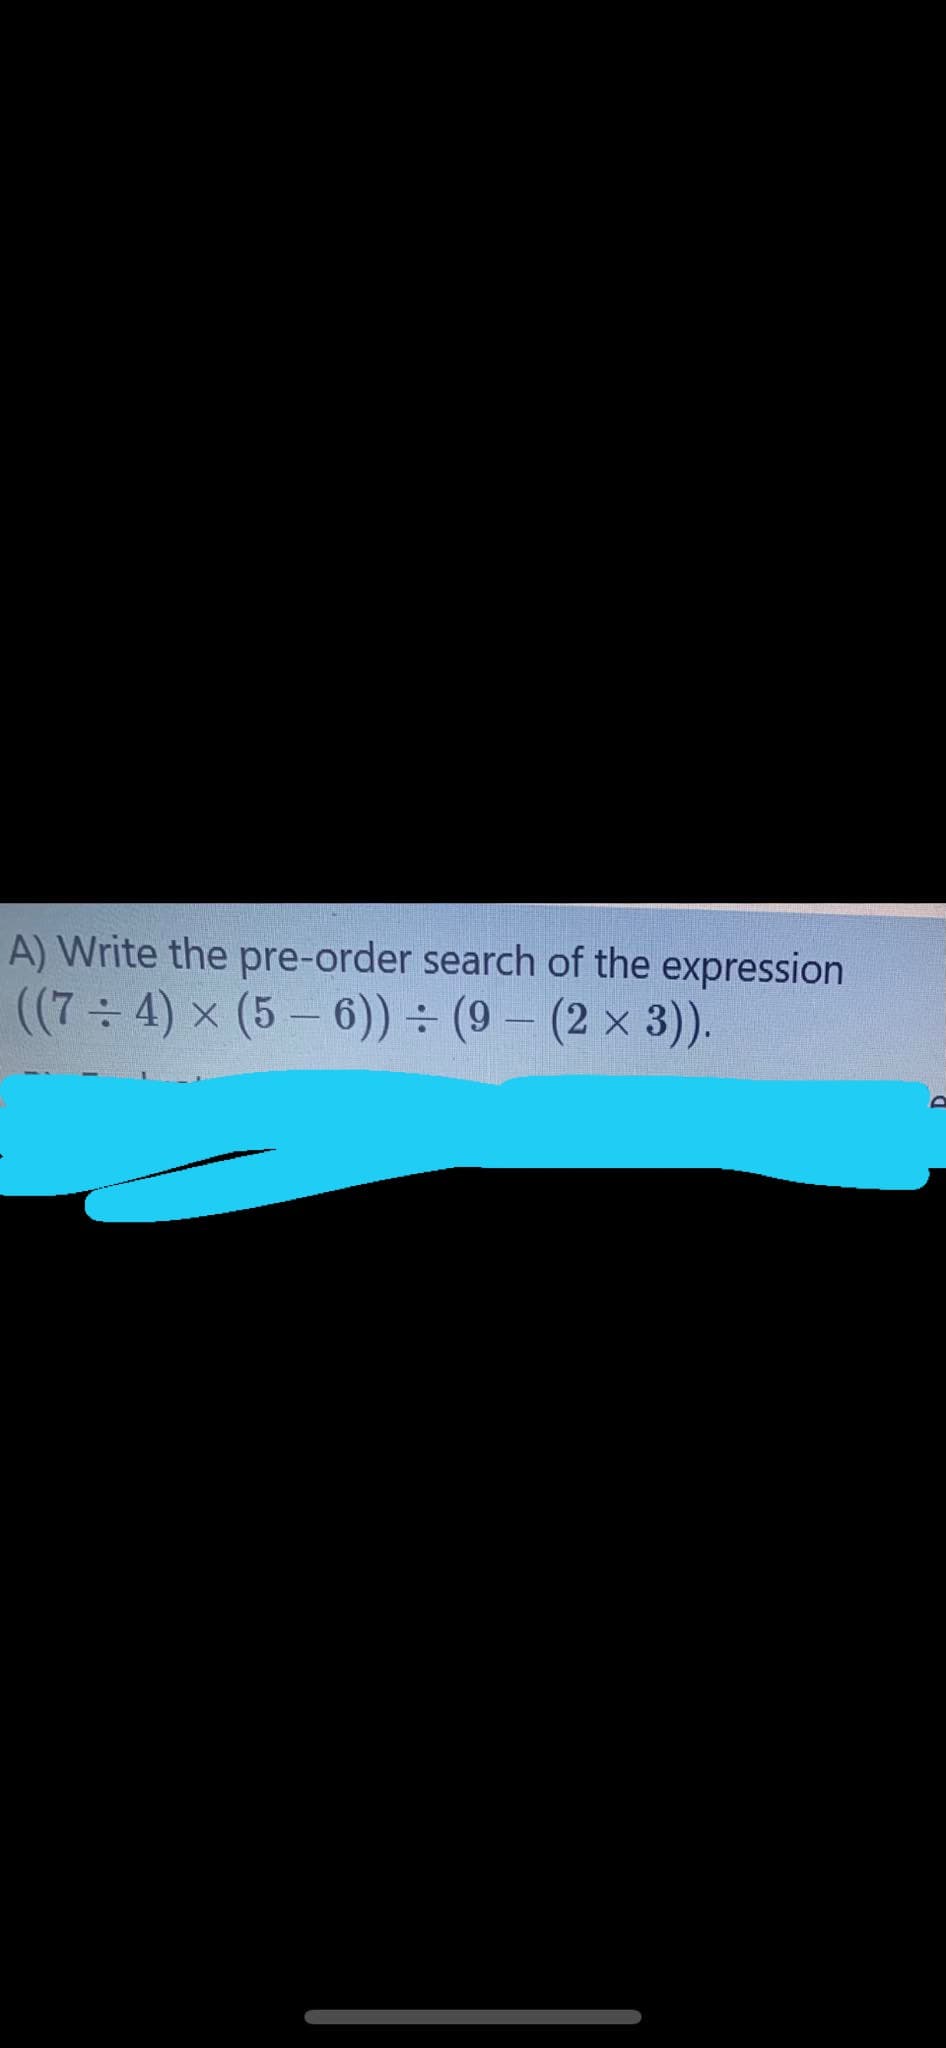 A) Write the pre-order search of the expression
((7 4) x (5– 6)) ÷ (9 – (2 × 3).
D.
